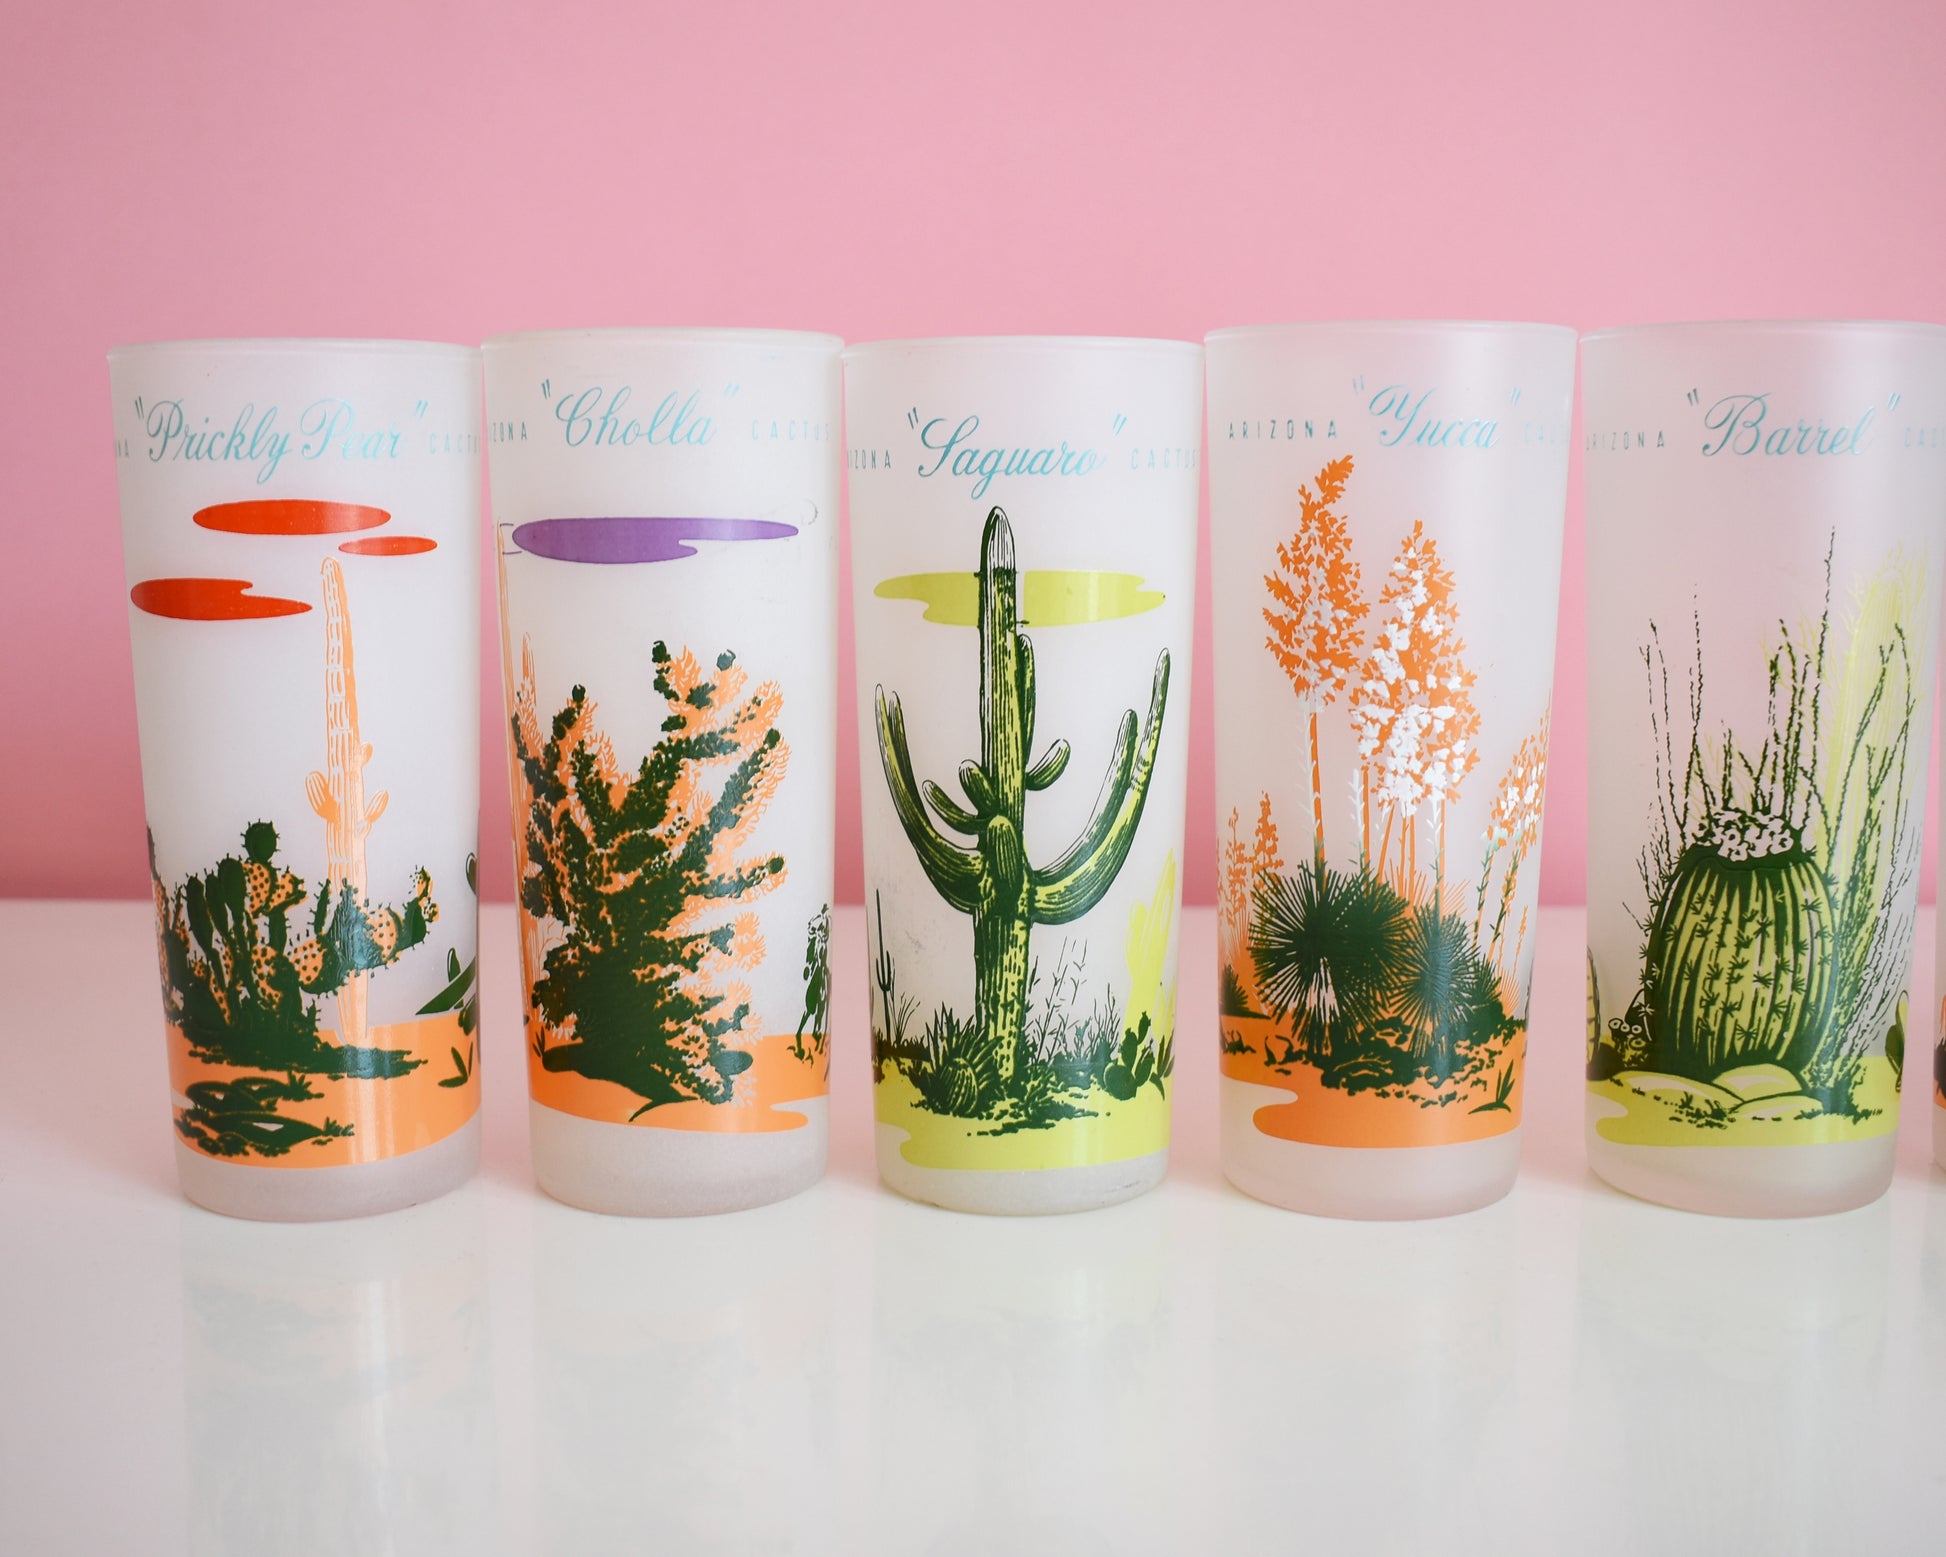 close up of a set of 8 vintage glasses that each have a cactus or plant that is native to Arizona